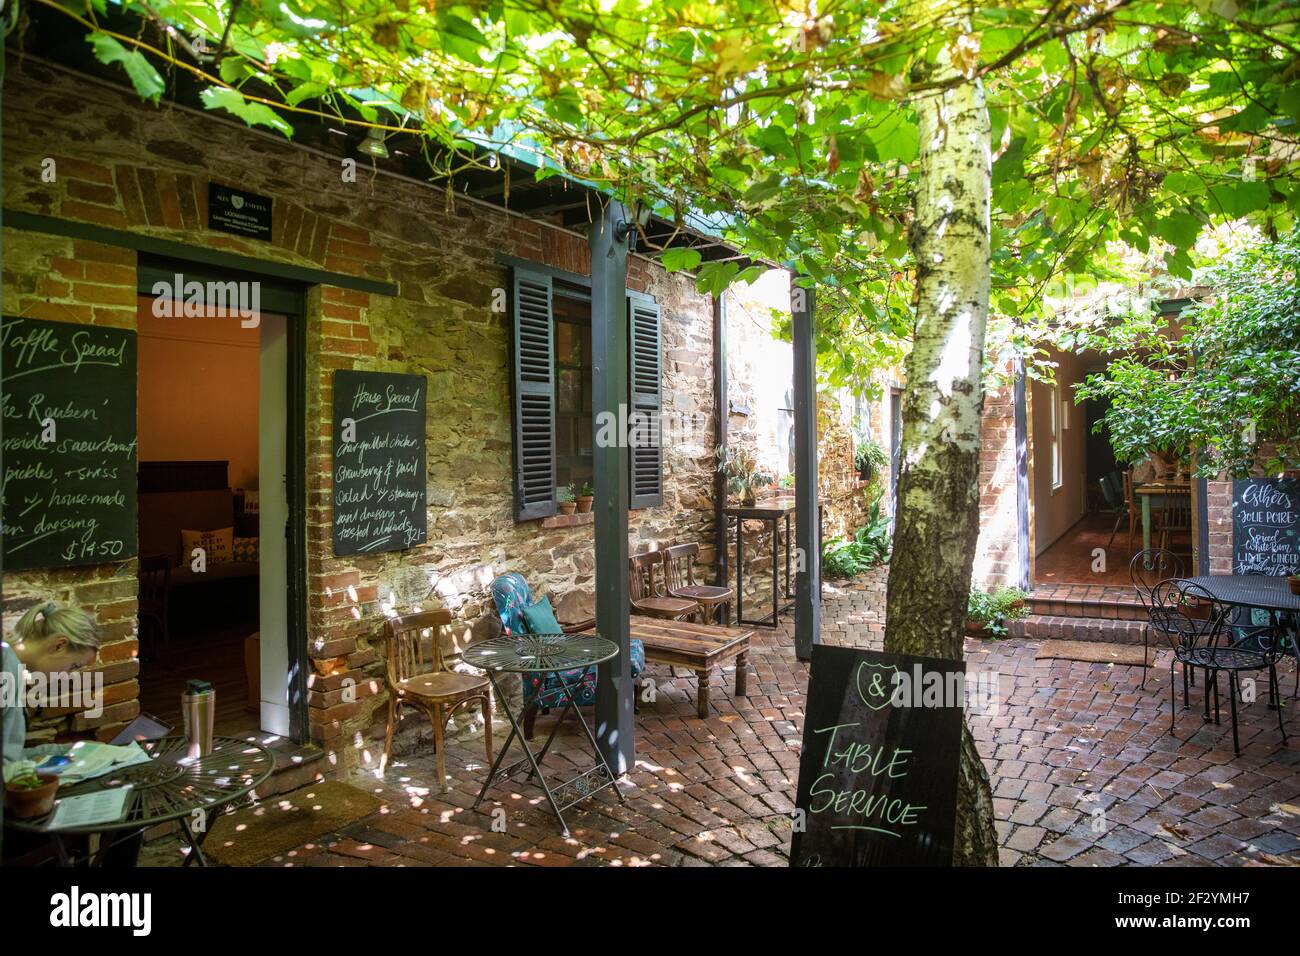 Mudgee , Alby and Esthers coffee shop and cafe with quaint courtyard,Mudgee,regional NSW,Australia Stock Photo